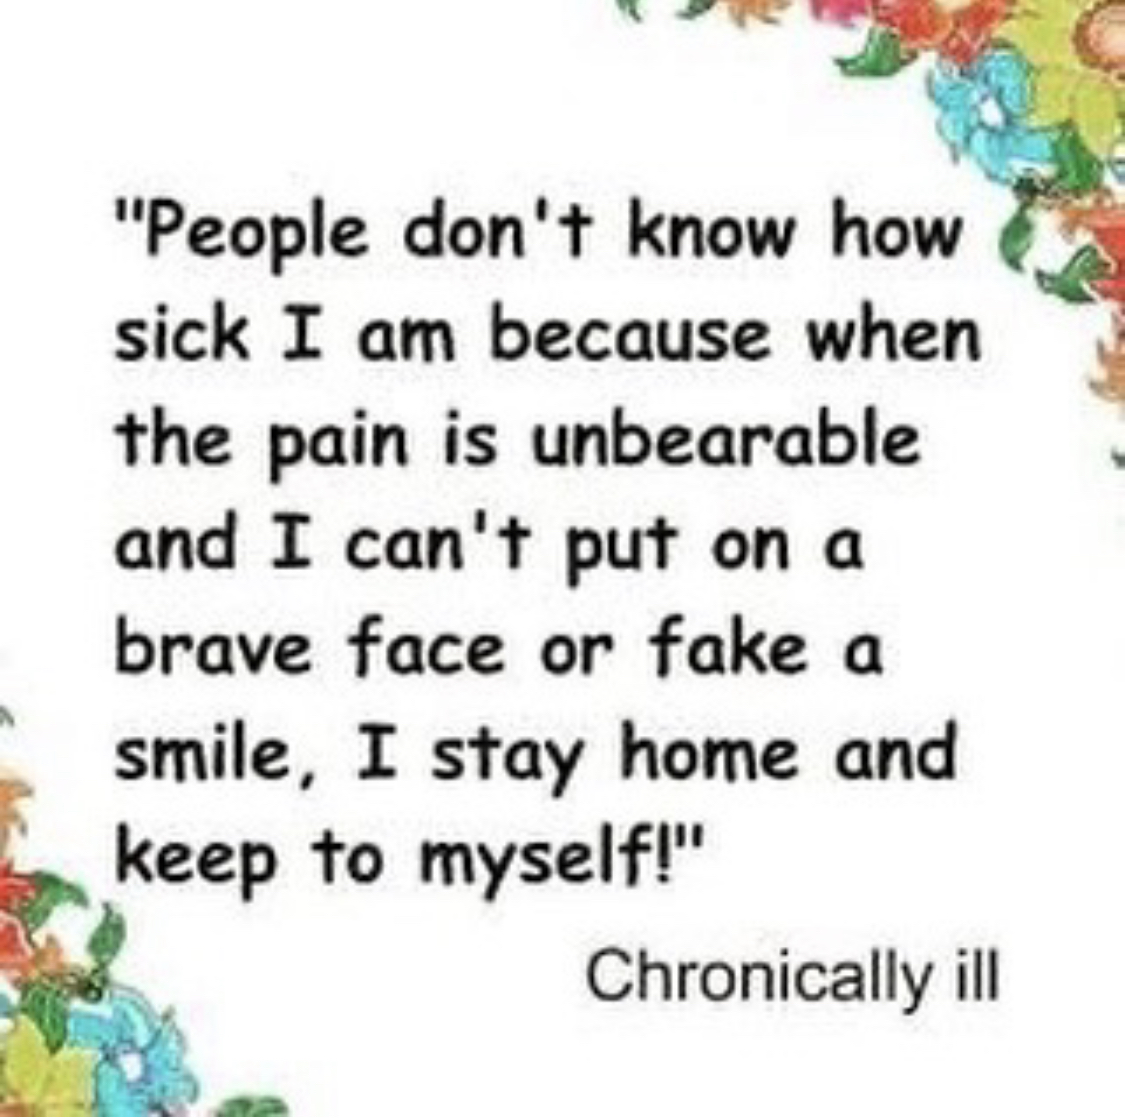 For me this is exactly right. not one person knows when I get very sick. I prefer to stay at home in the peace and quiet and recover until I feel well enough to interact with people again. #lupus #lupustrust #lupusawareness #chronicillness #chronicpain